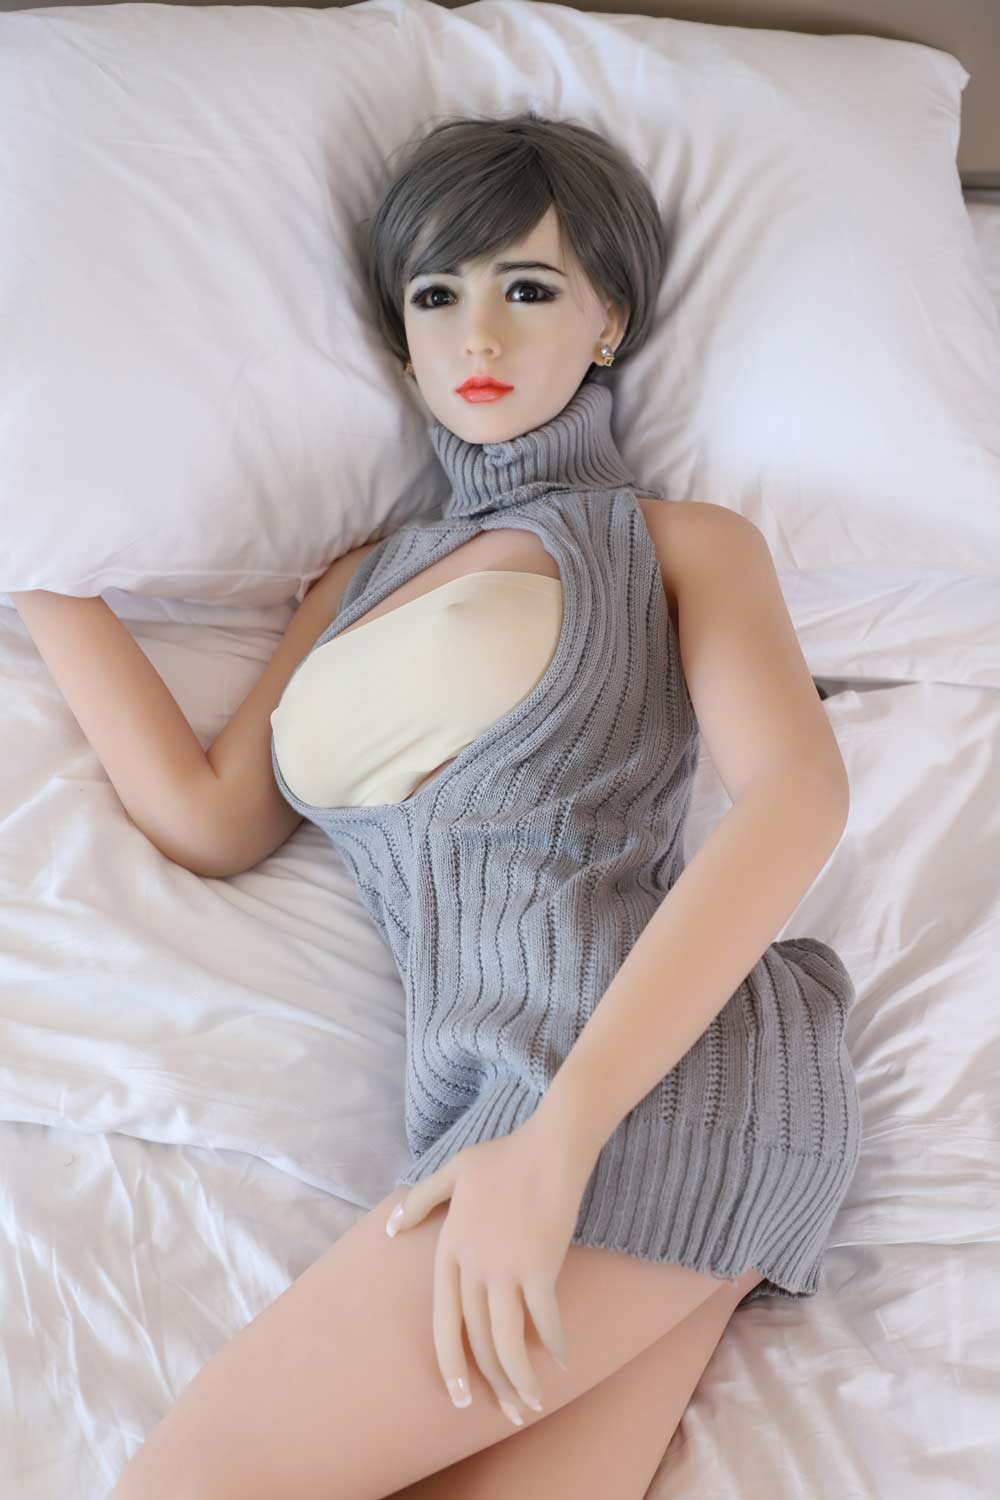 Silicone sex doll with hands in pillows